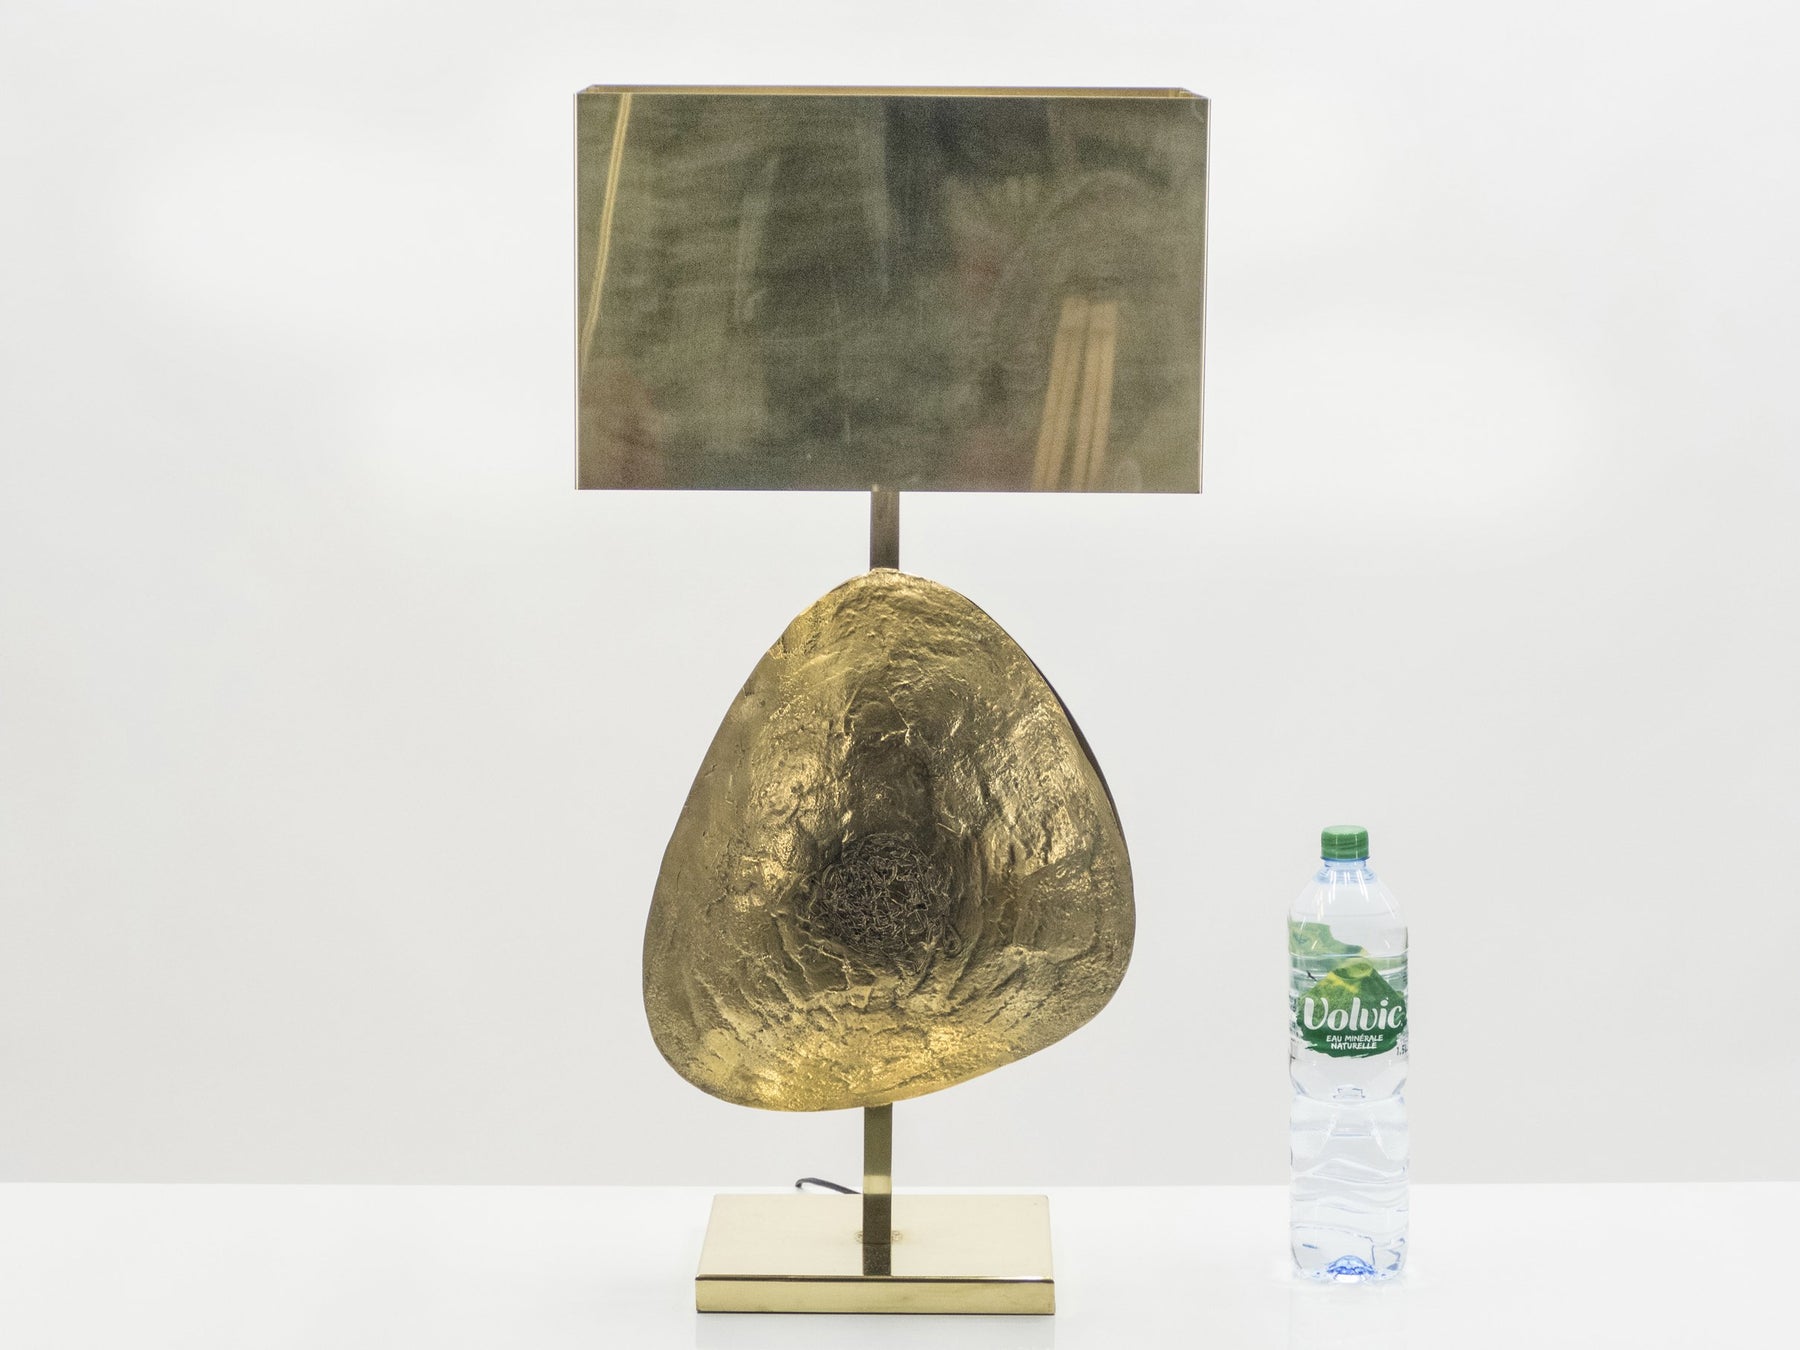 Large Belgian Willy Daro table lamp in brass and bronze 1970s